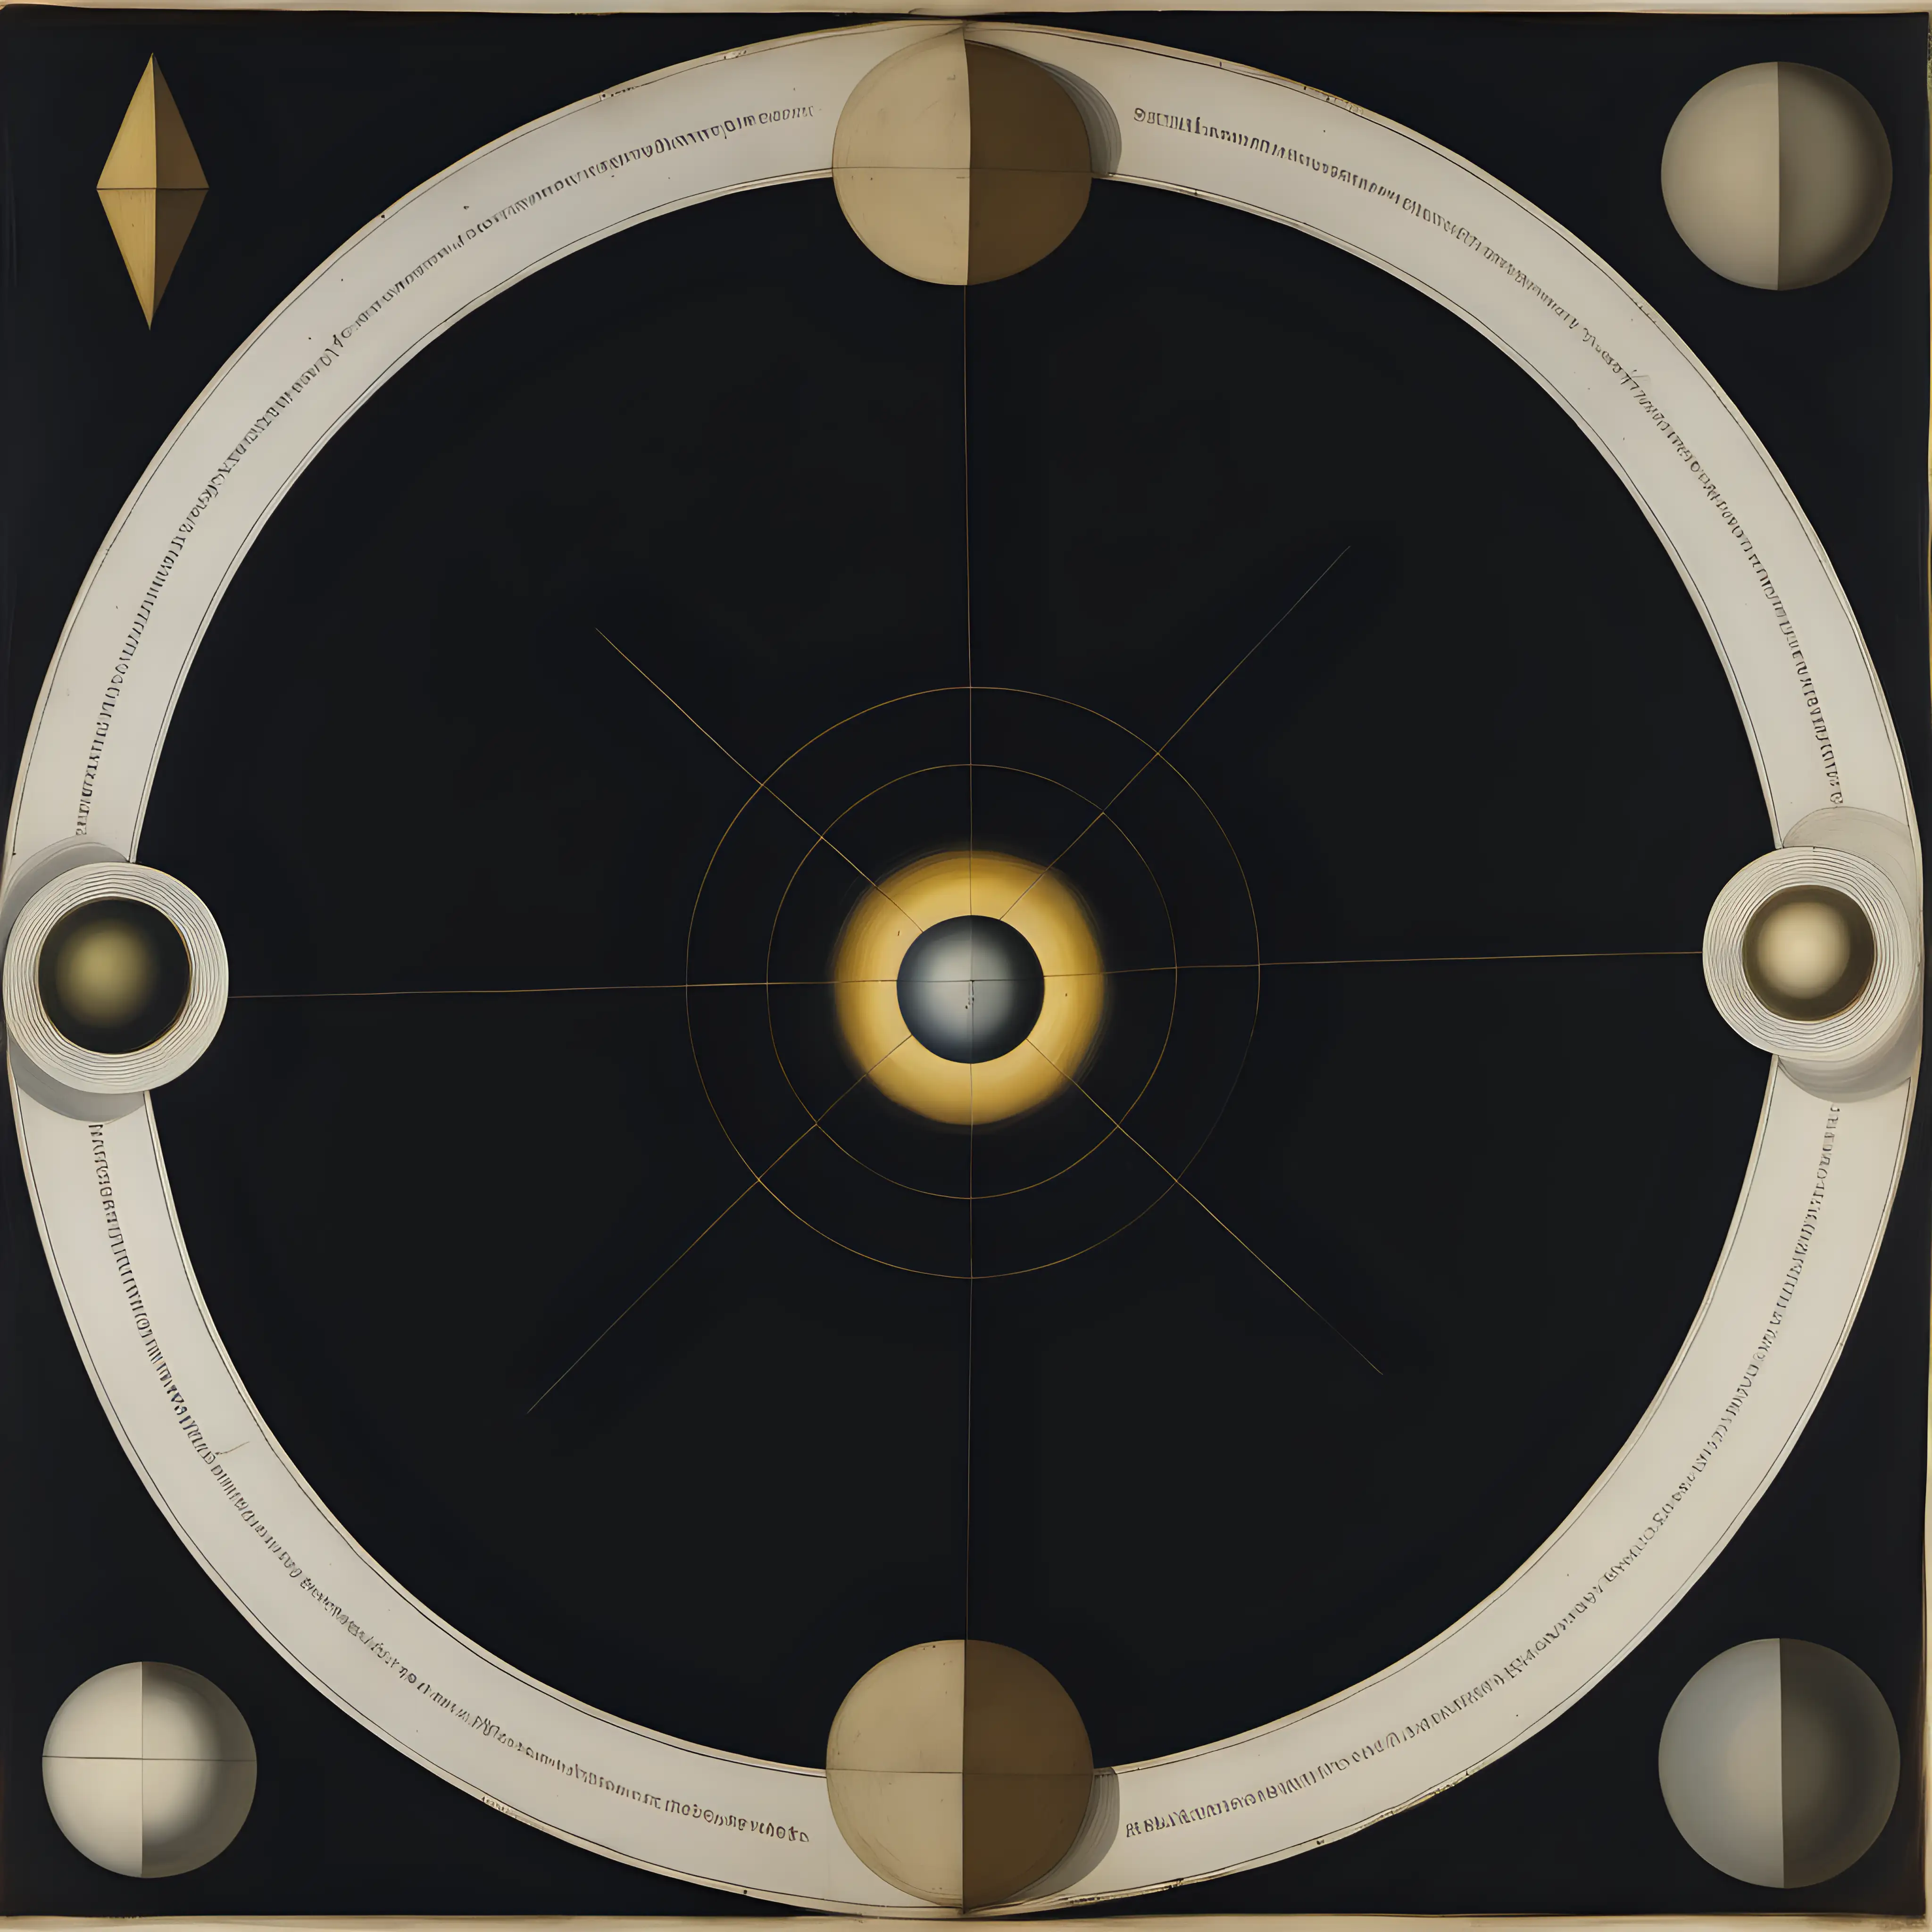 The English physician Robert Fludd created this painting in Utriusque cosmi maioris scilicet et minoris metaphysica in 1617 (‘The history of the physical and metaphysical cosmos’). In this image, Fludd attempted to capture infinity. Like Malevich’s 20th-century version, Fludd’s painting is in fact strictly speaking a rhombus; each side is deliberately distorted. While for many, the blackness might signify mortality and death, for Fludd this image represented the beginning of creation. This painting does not have any items that represent things in the visual world. Can you generated this image for me?